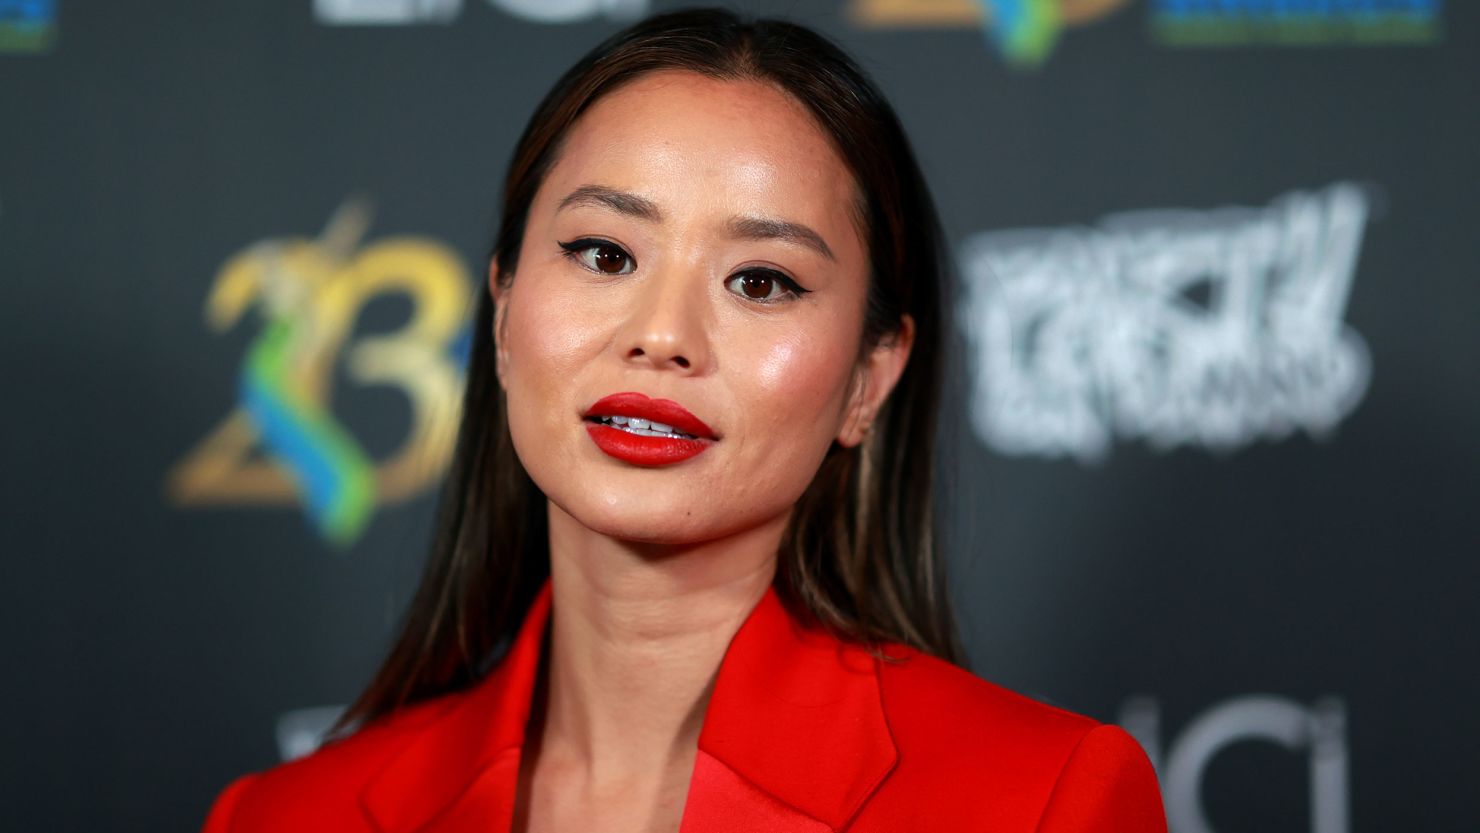 Jamie Chung attends the 23rd Women's Images Awards at Saban Theatre on October 14, 2021 in Beverly Hills, California. 